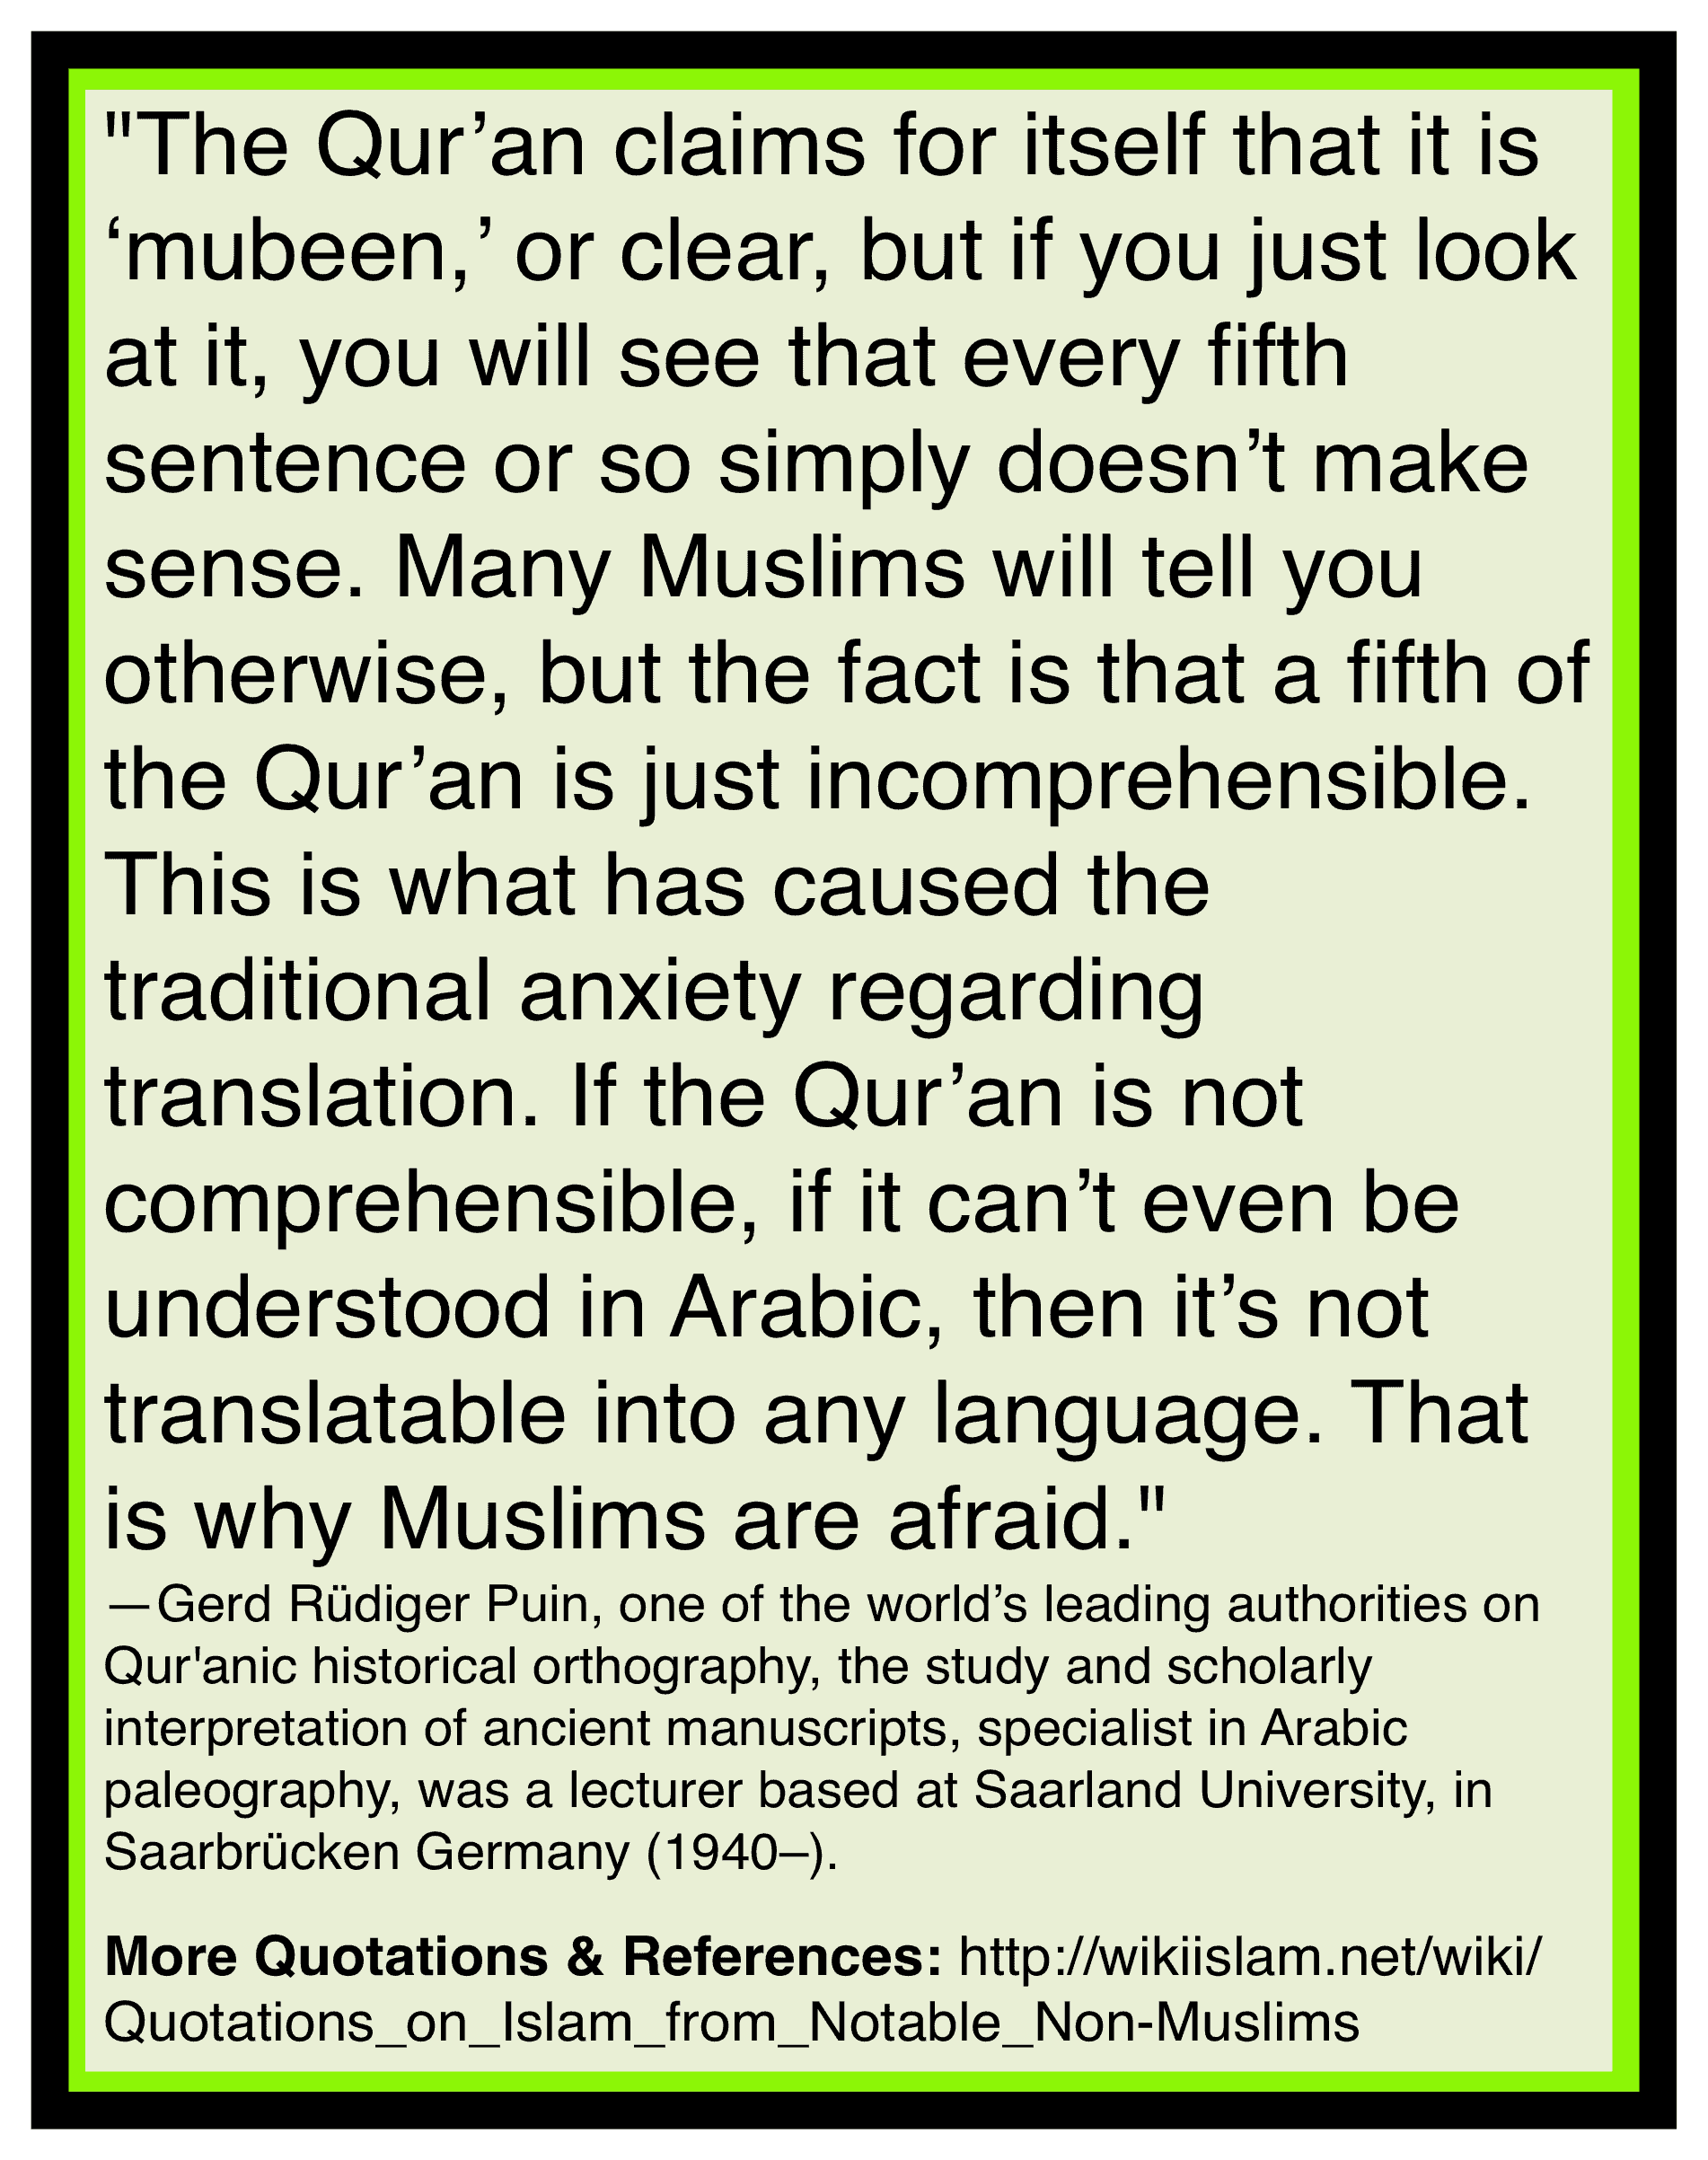 Quran is a mess and unclear